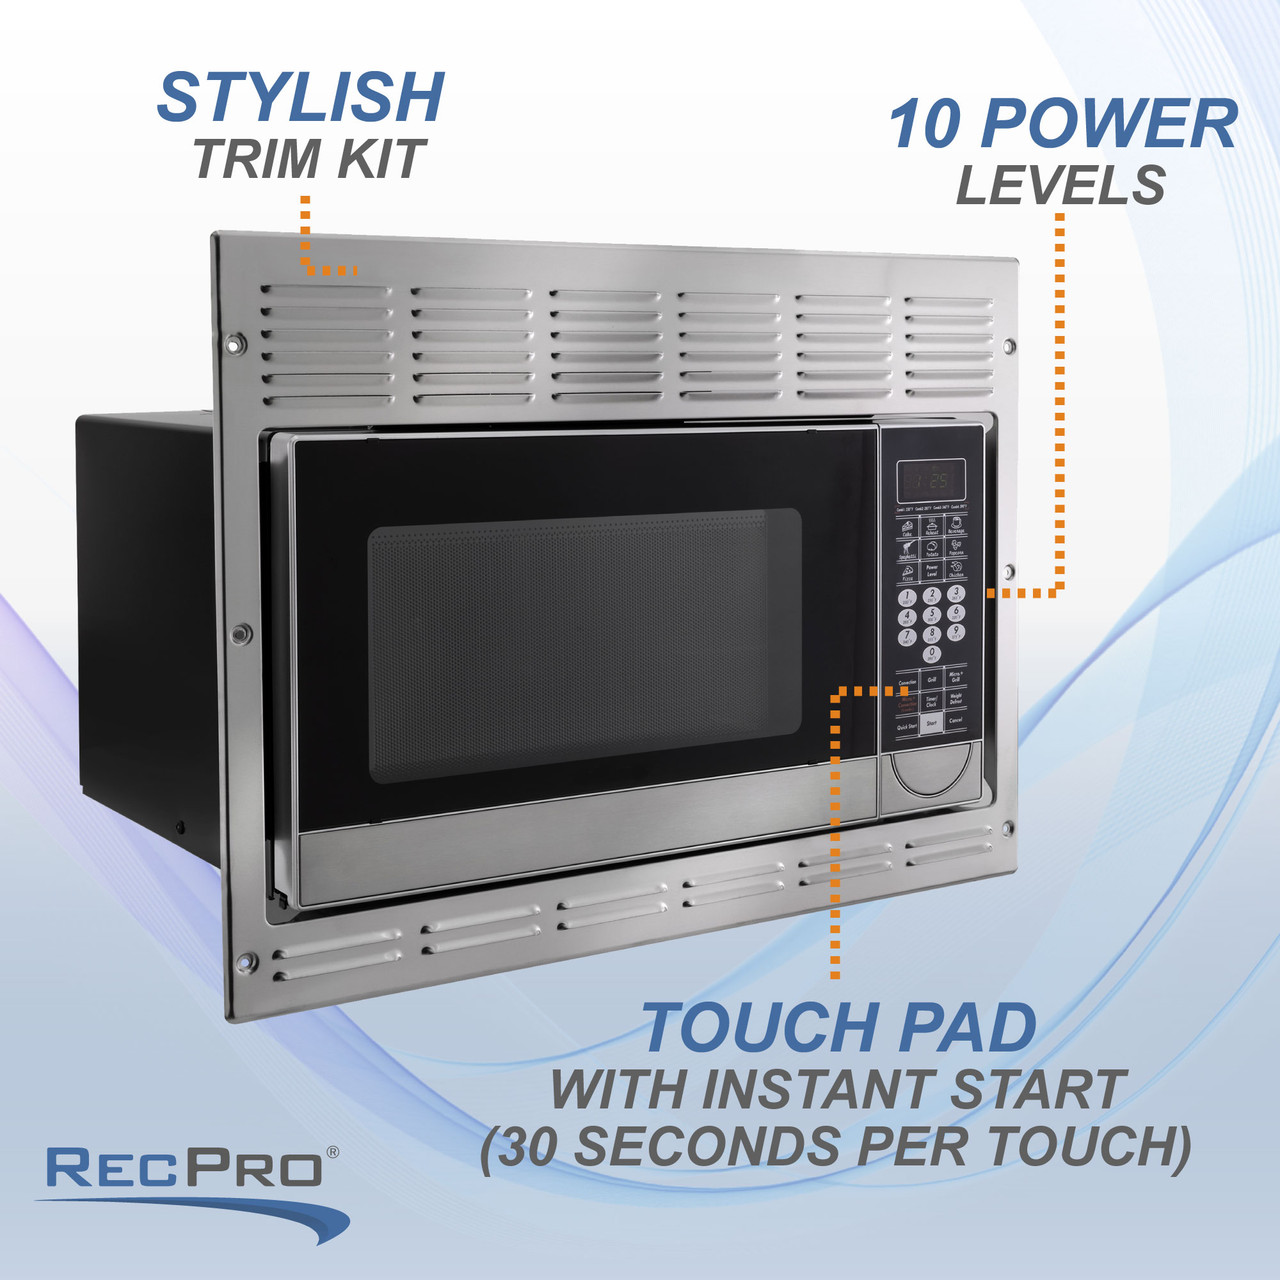 BUILT-IN 1.0 Cu.Ft, Mid-Size Microwave Oven & Trim/Venting Kit, Stainless  Steel